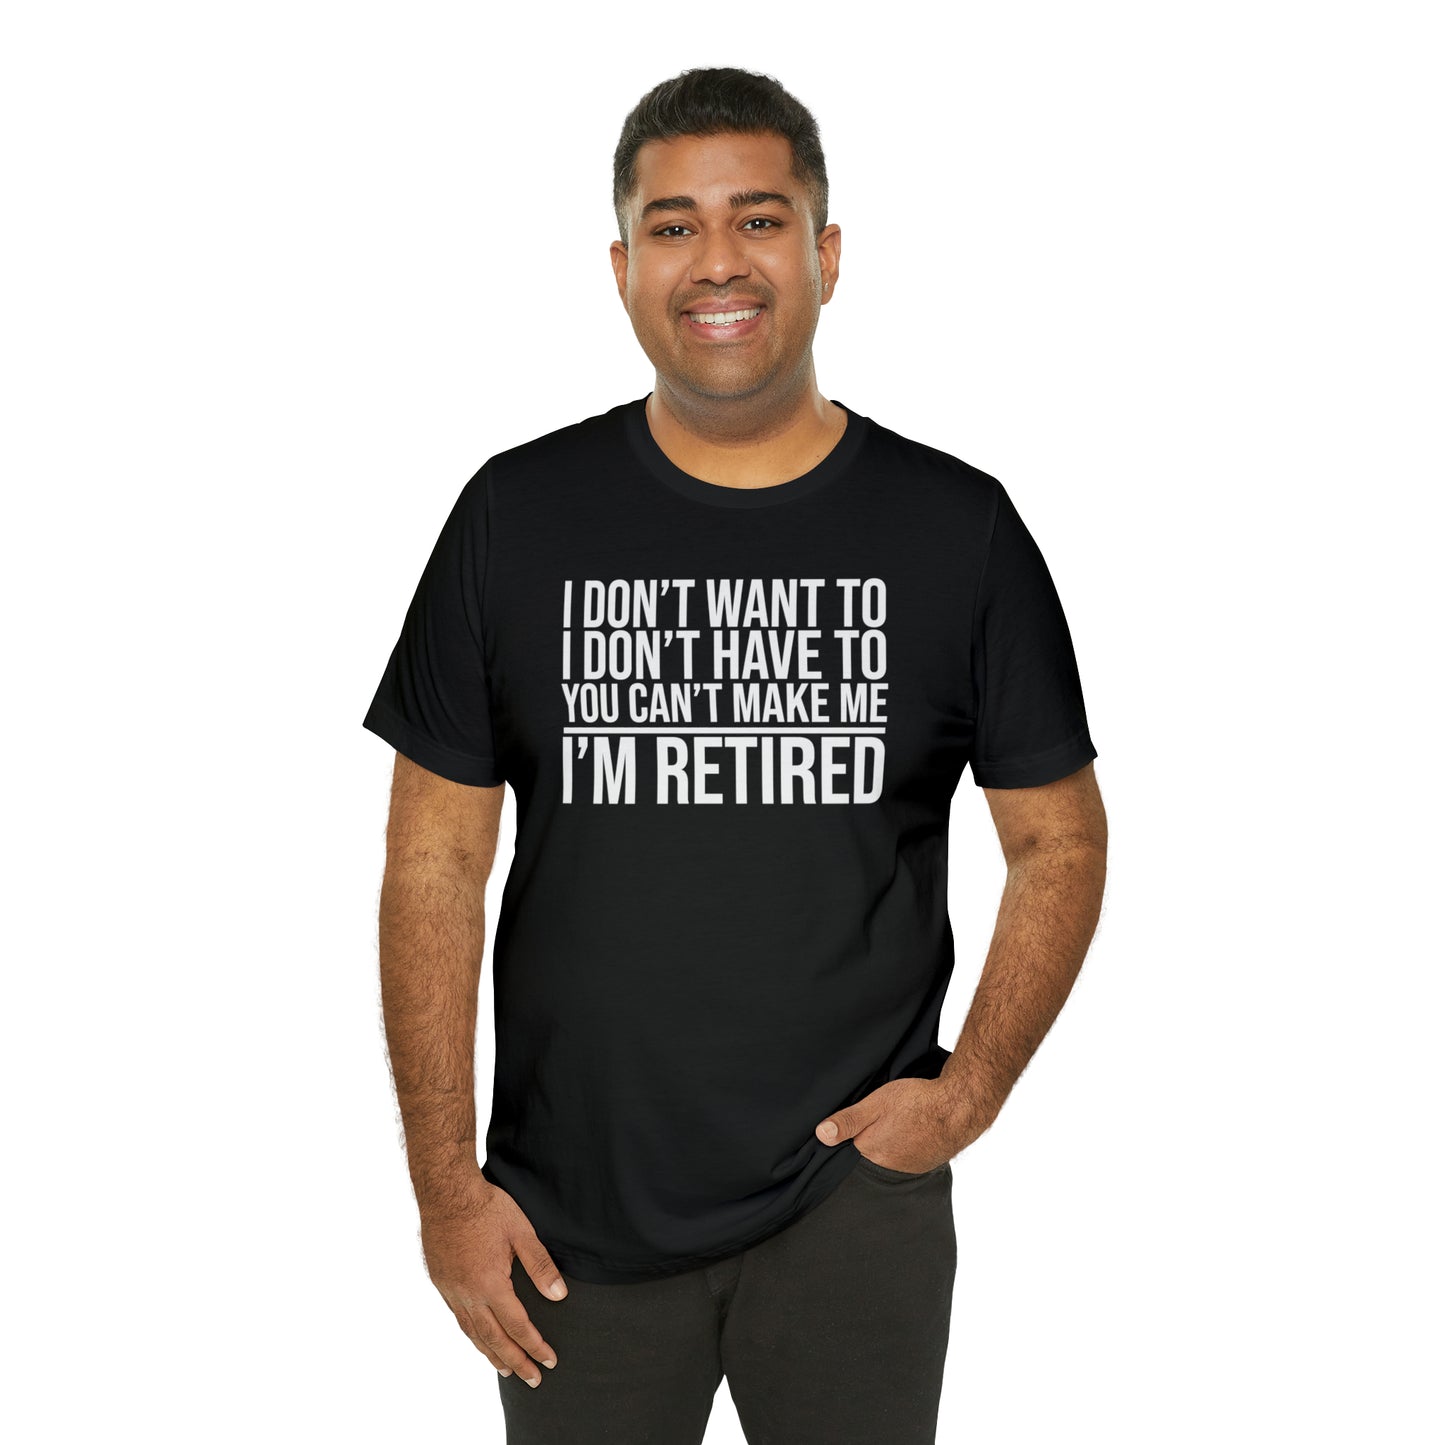 I Don't Want to I Don't Have to I'm Retired T-Shirt, Retirement Party, Retirement Gift for Men or Women, End of Work Shirt, Do It Yourself